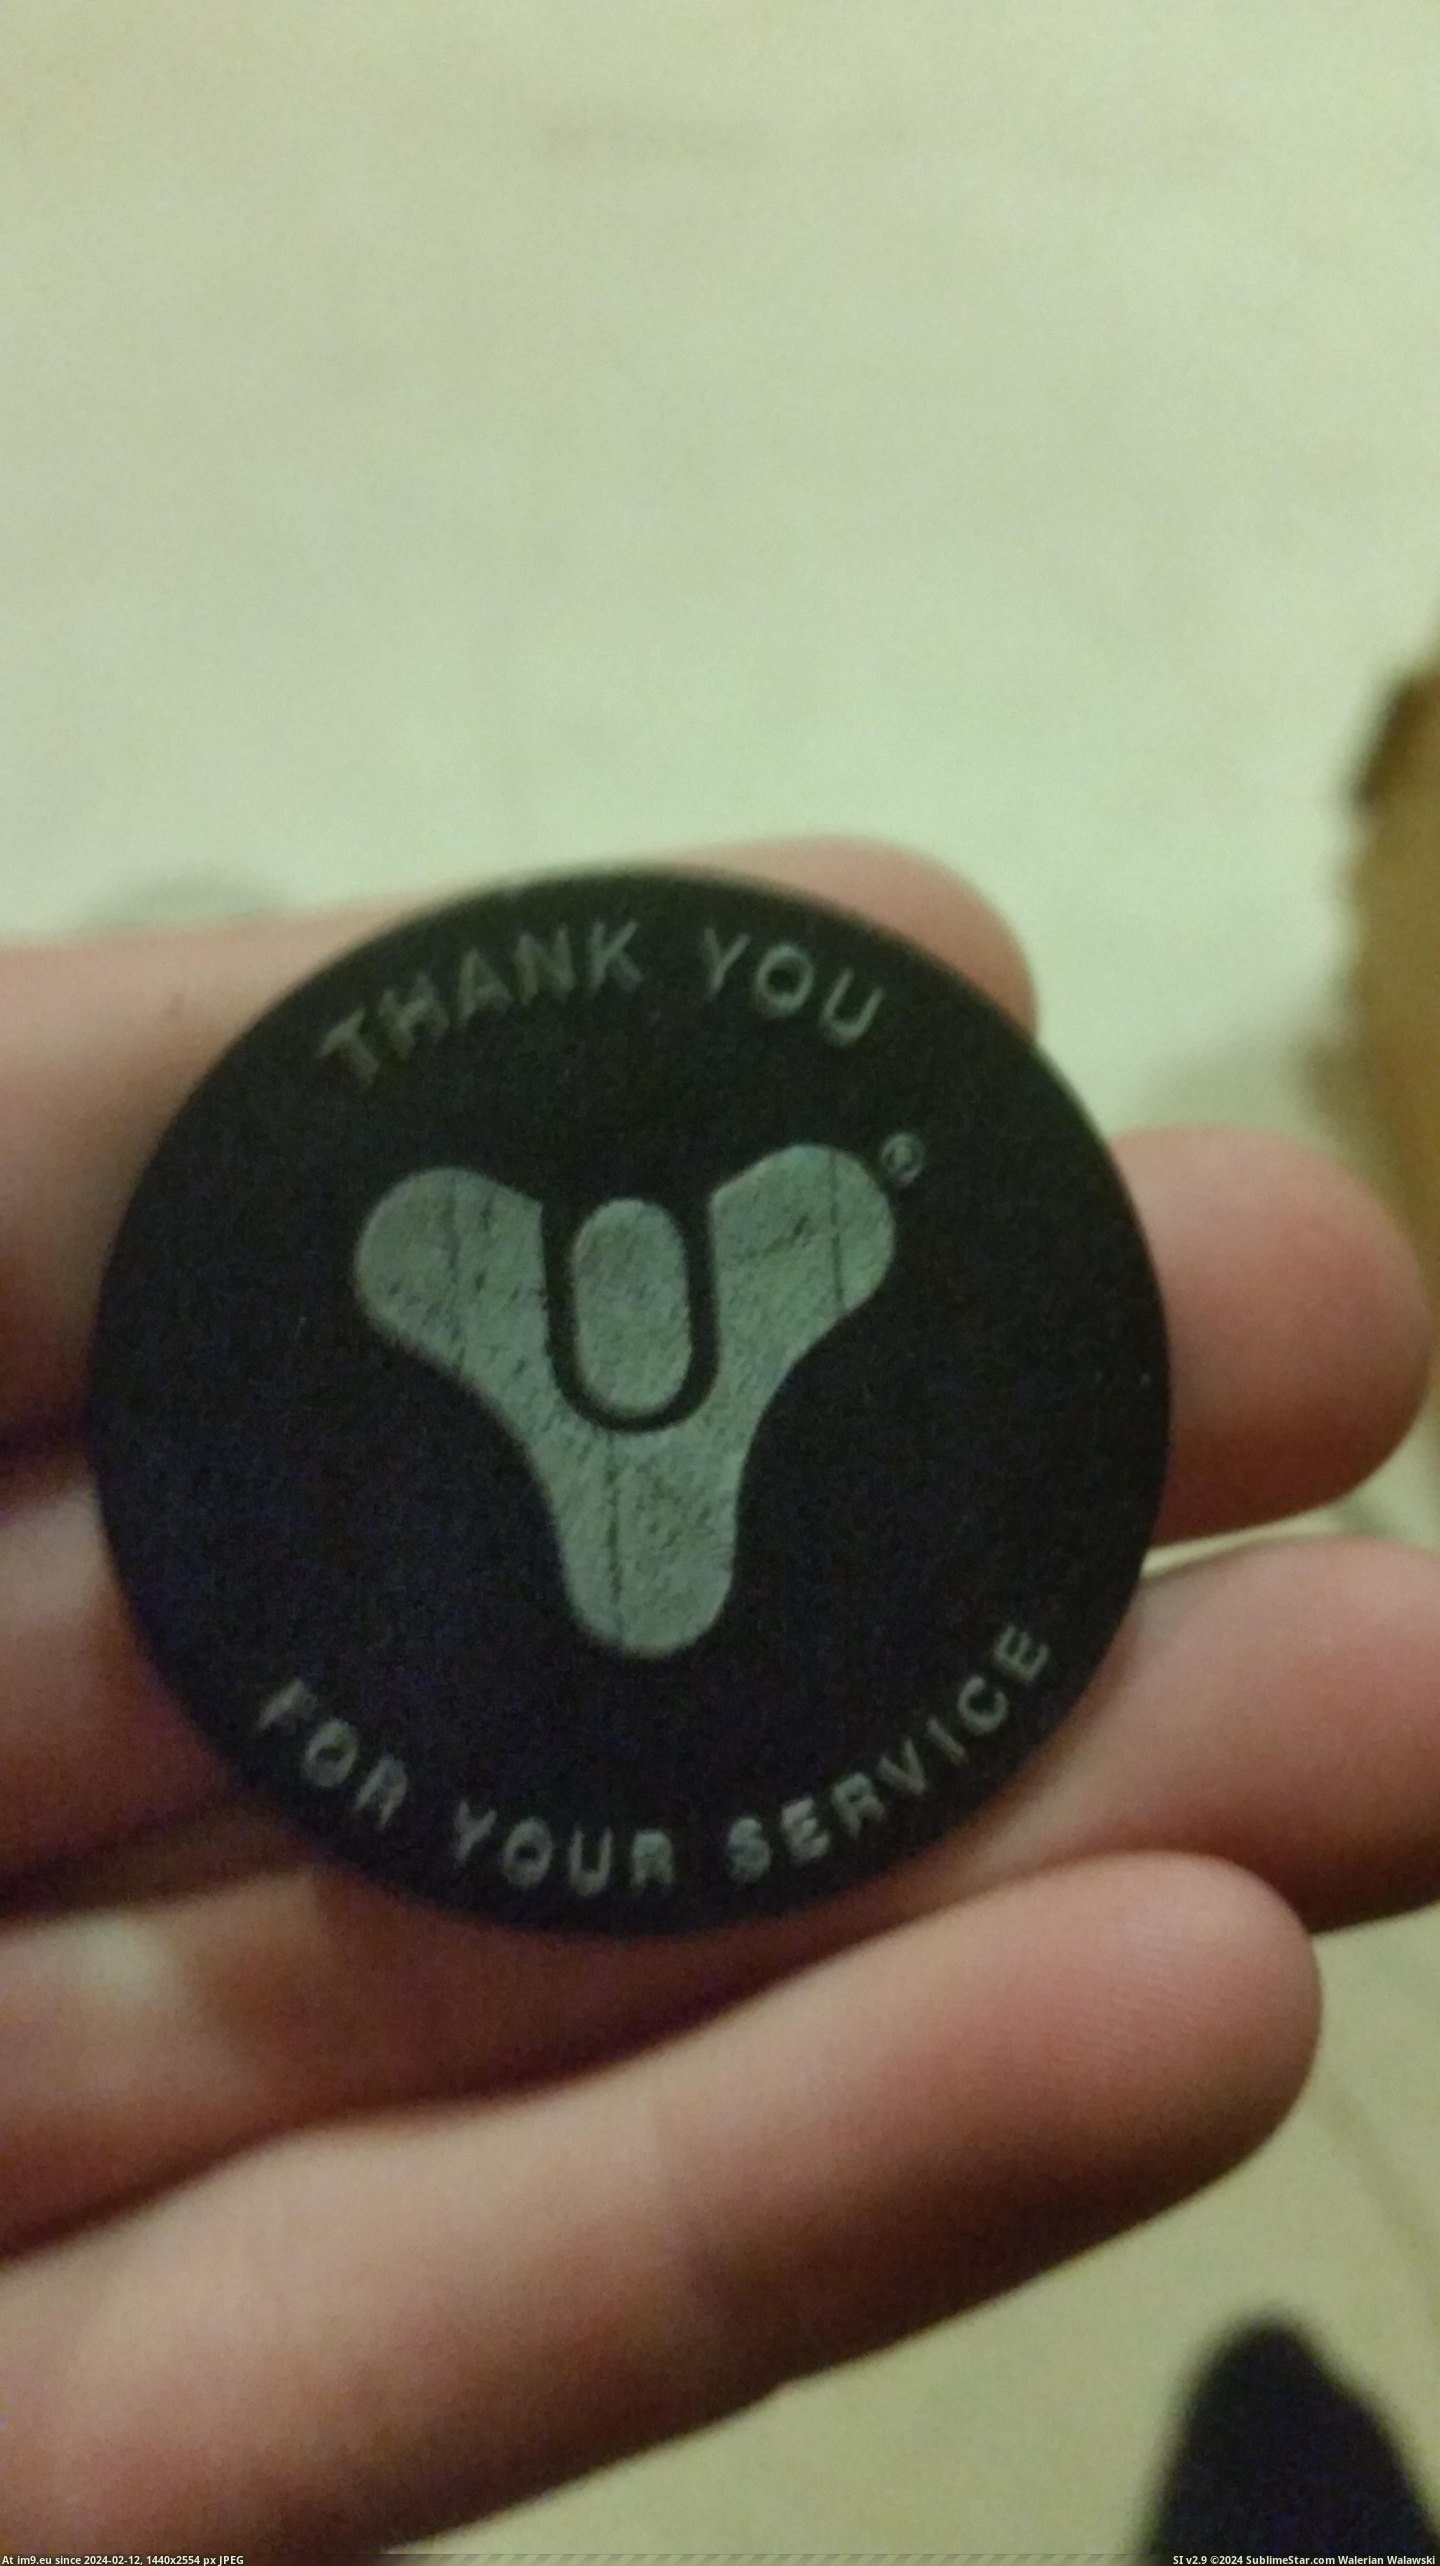 #Gaming #Game #Coin #Destiny #Military #Buy [Gaming] For being in the military, we get a Destiny coin when we buy the game! Pic. (Bild von album My r/GAMING favs))